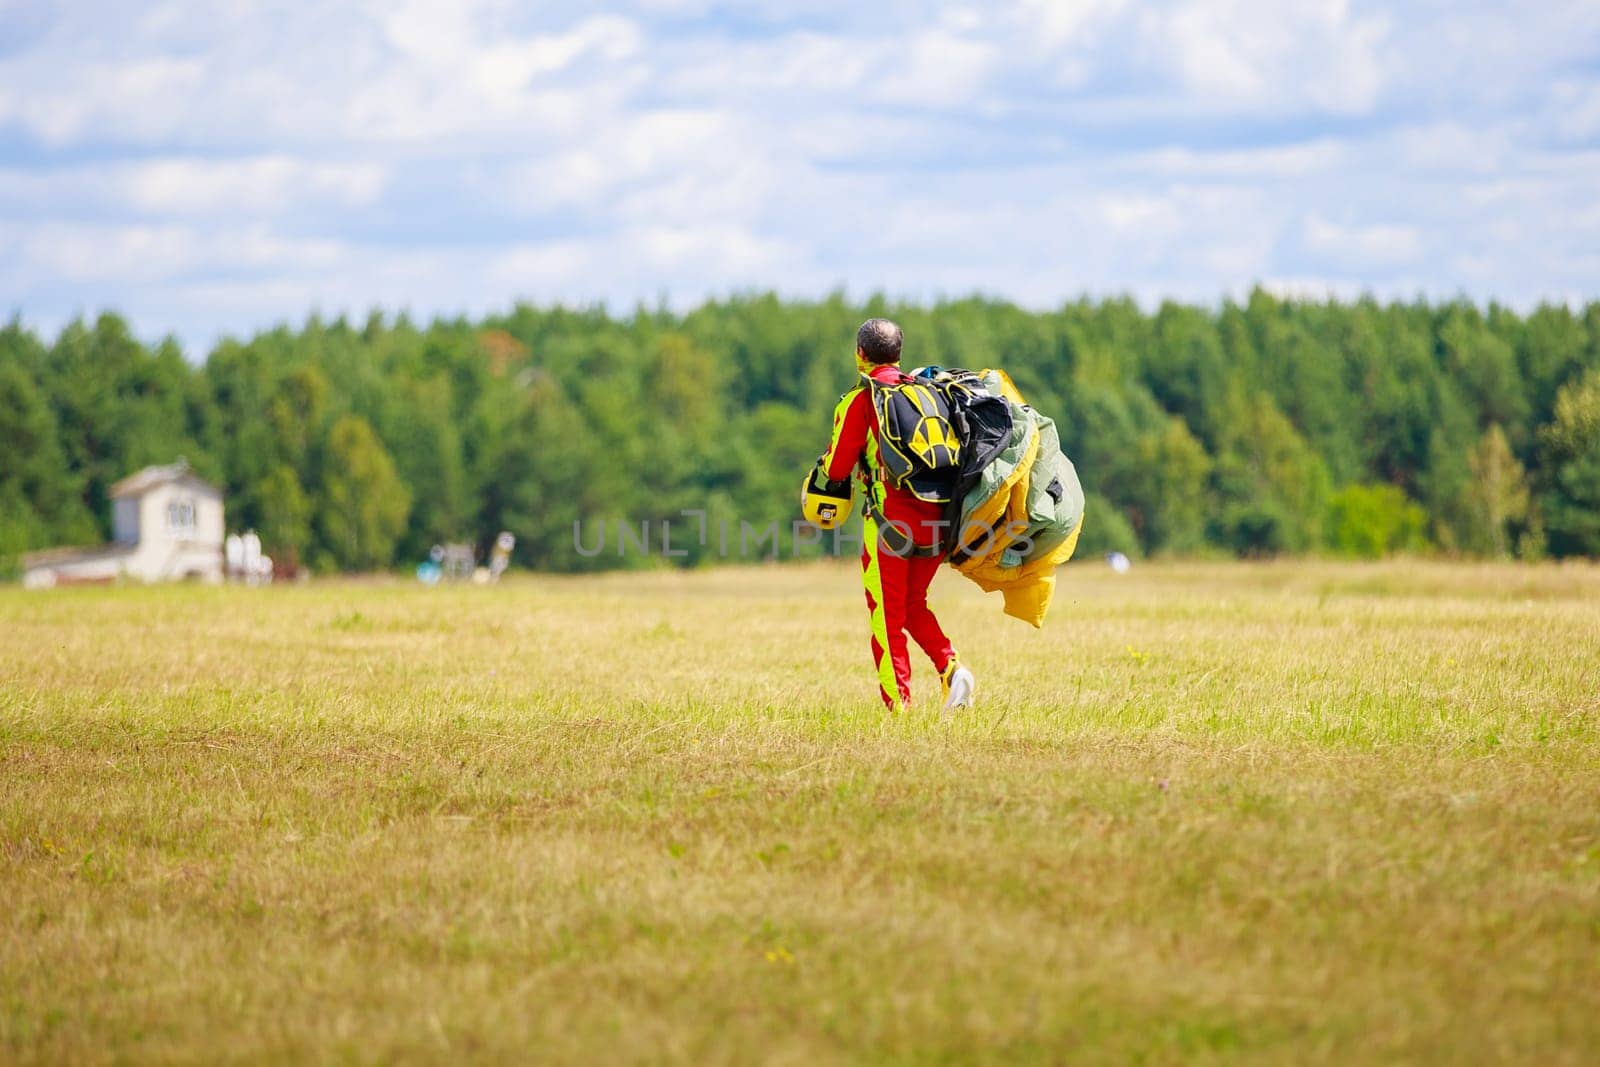 Skydivers-athletes go with a parachute after the jump. High quality photo